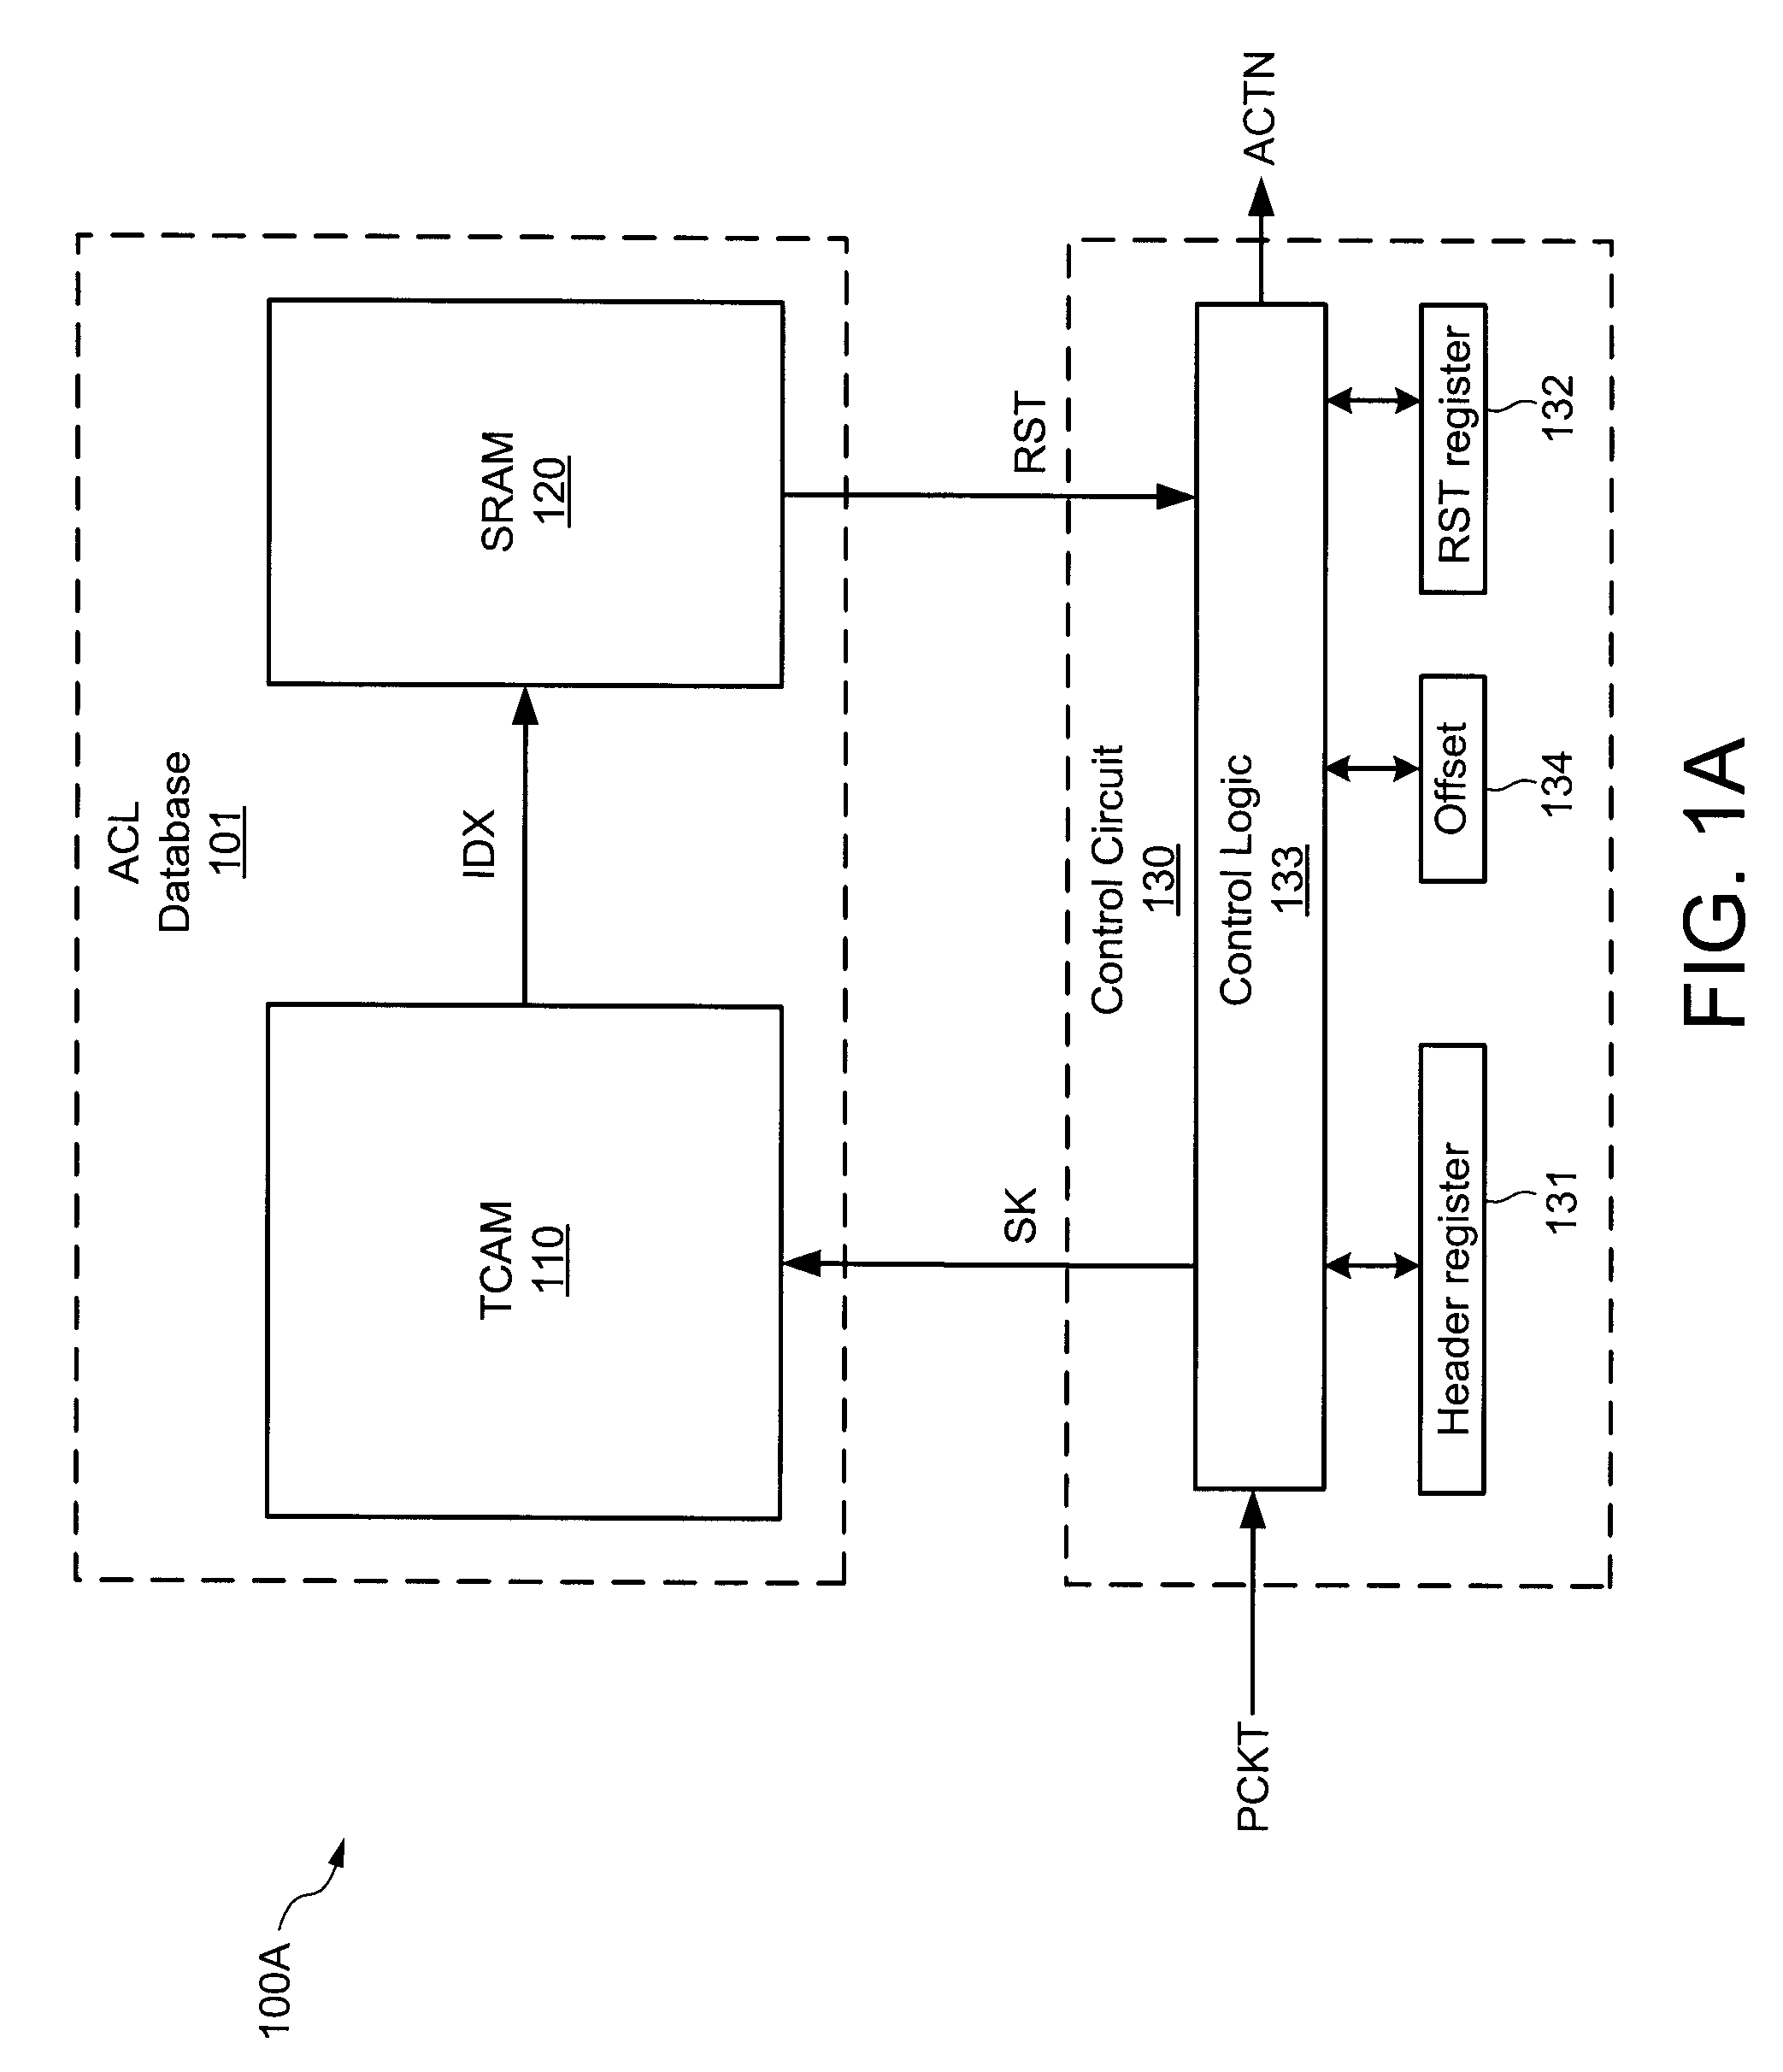 Method for combining and storing access control lists